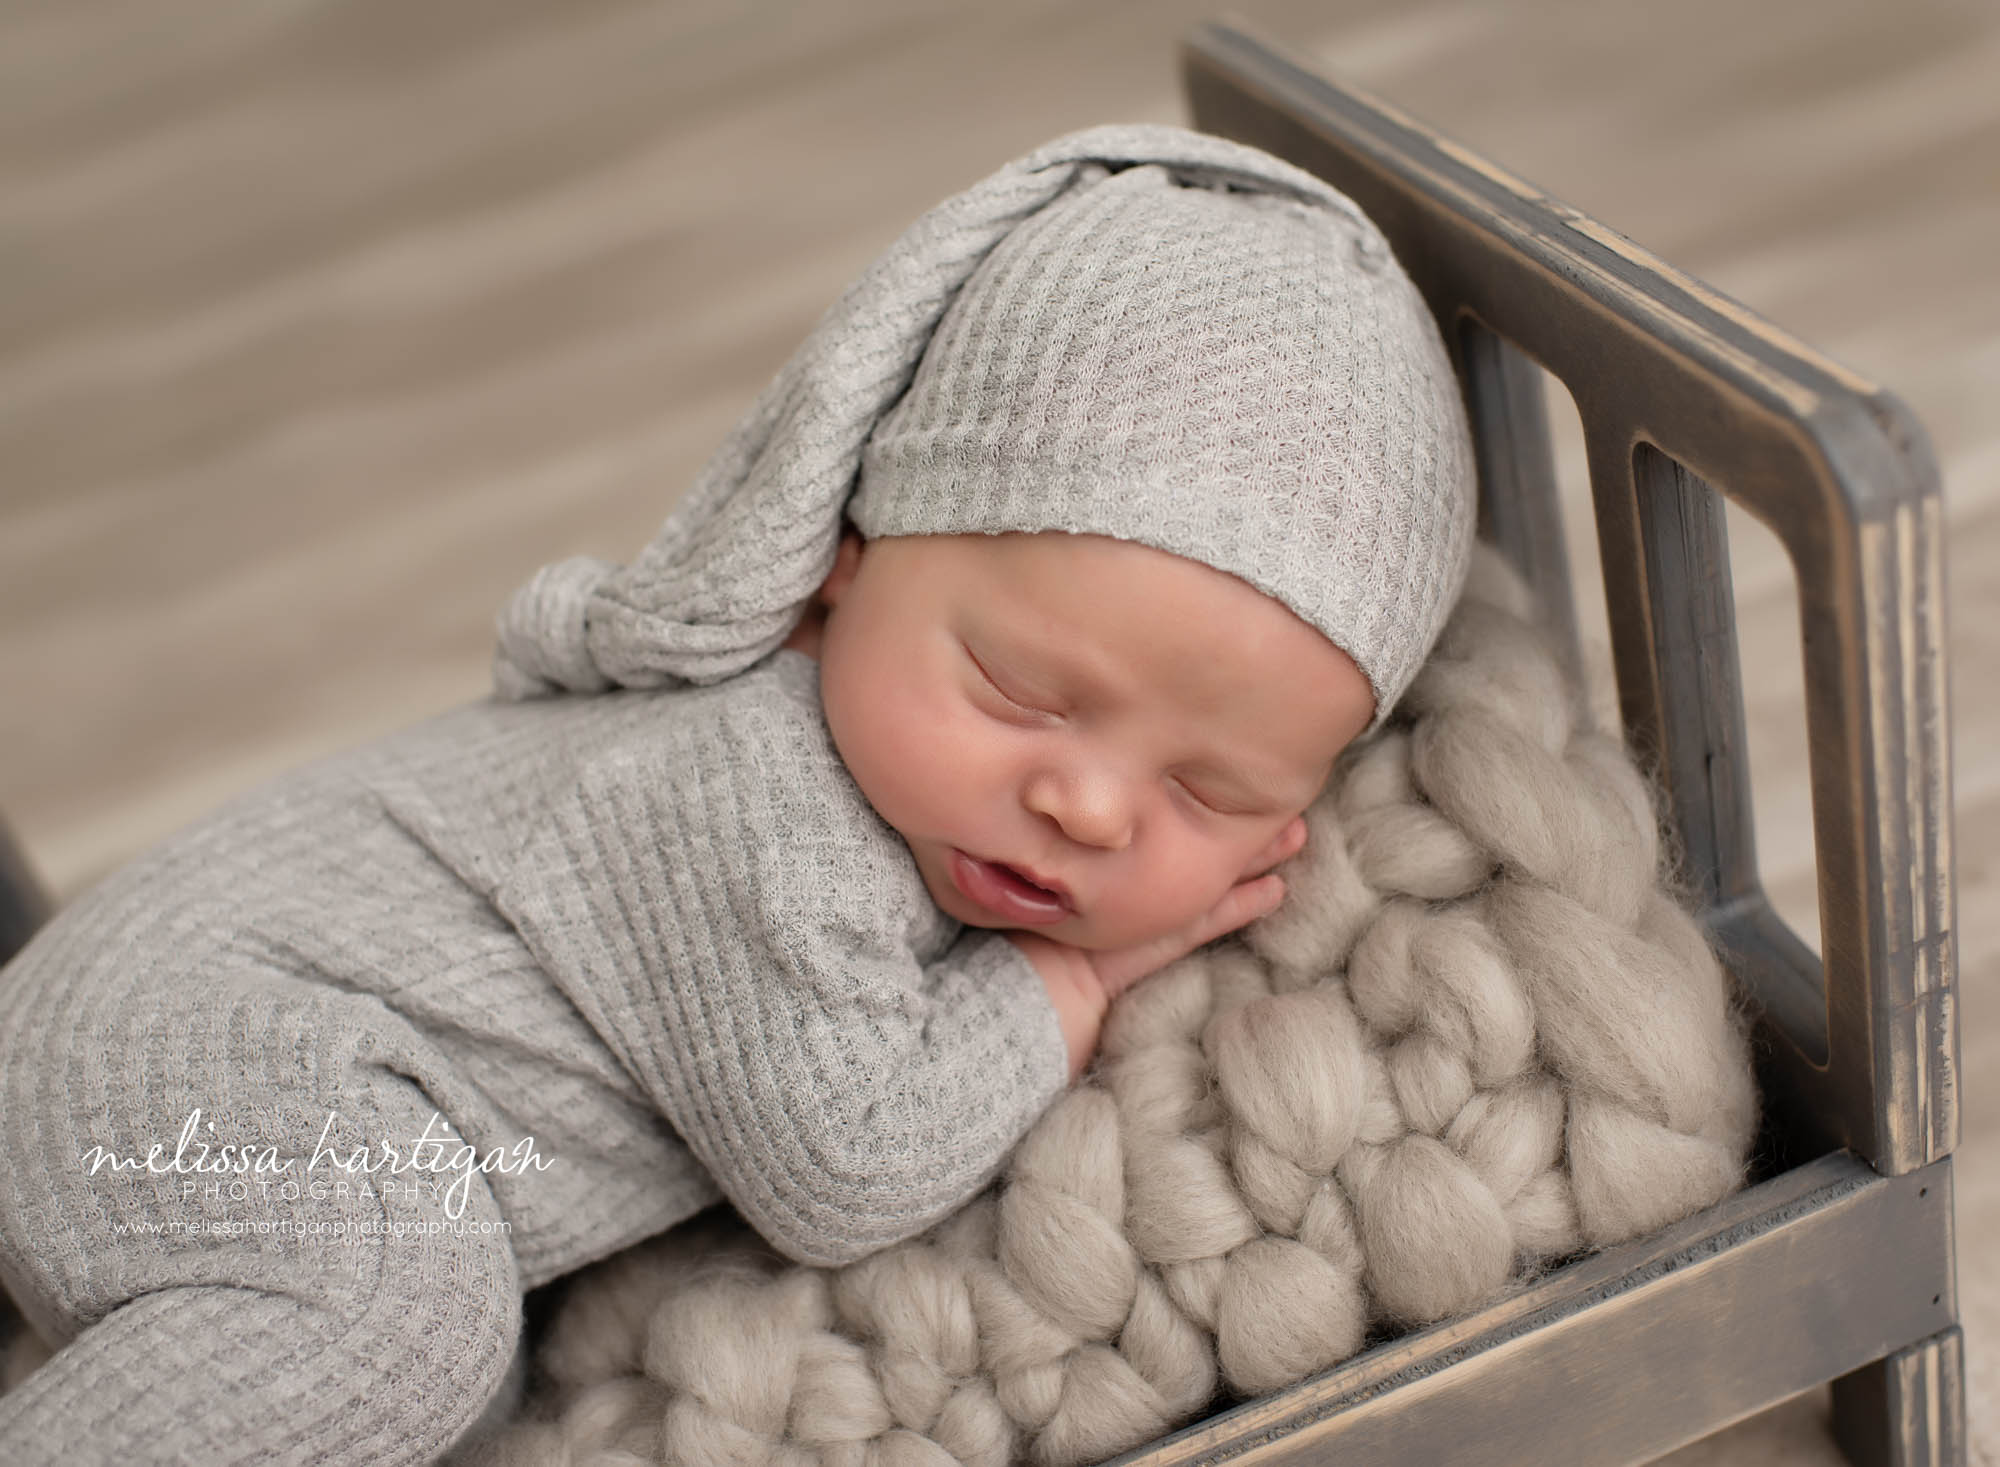 Baby boy posed in wooden bed wearing gray newborn outfit and sleepycap Newborn photographer CT